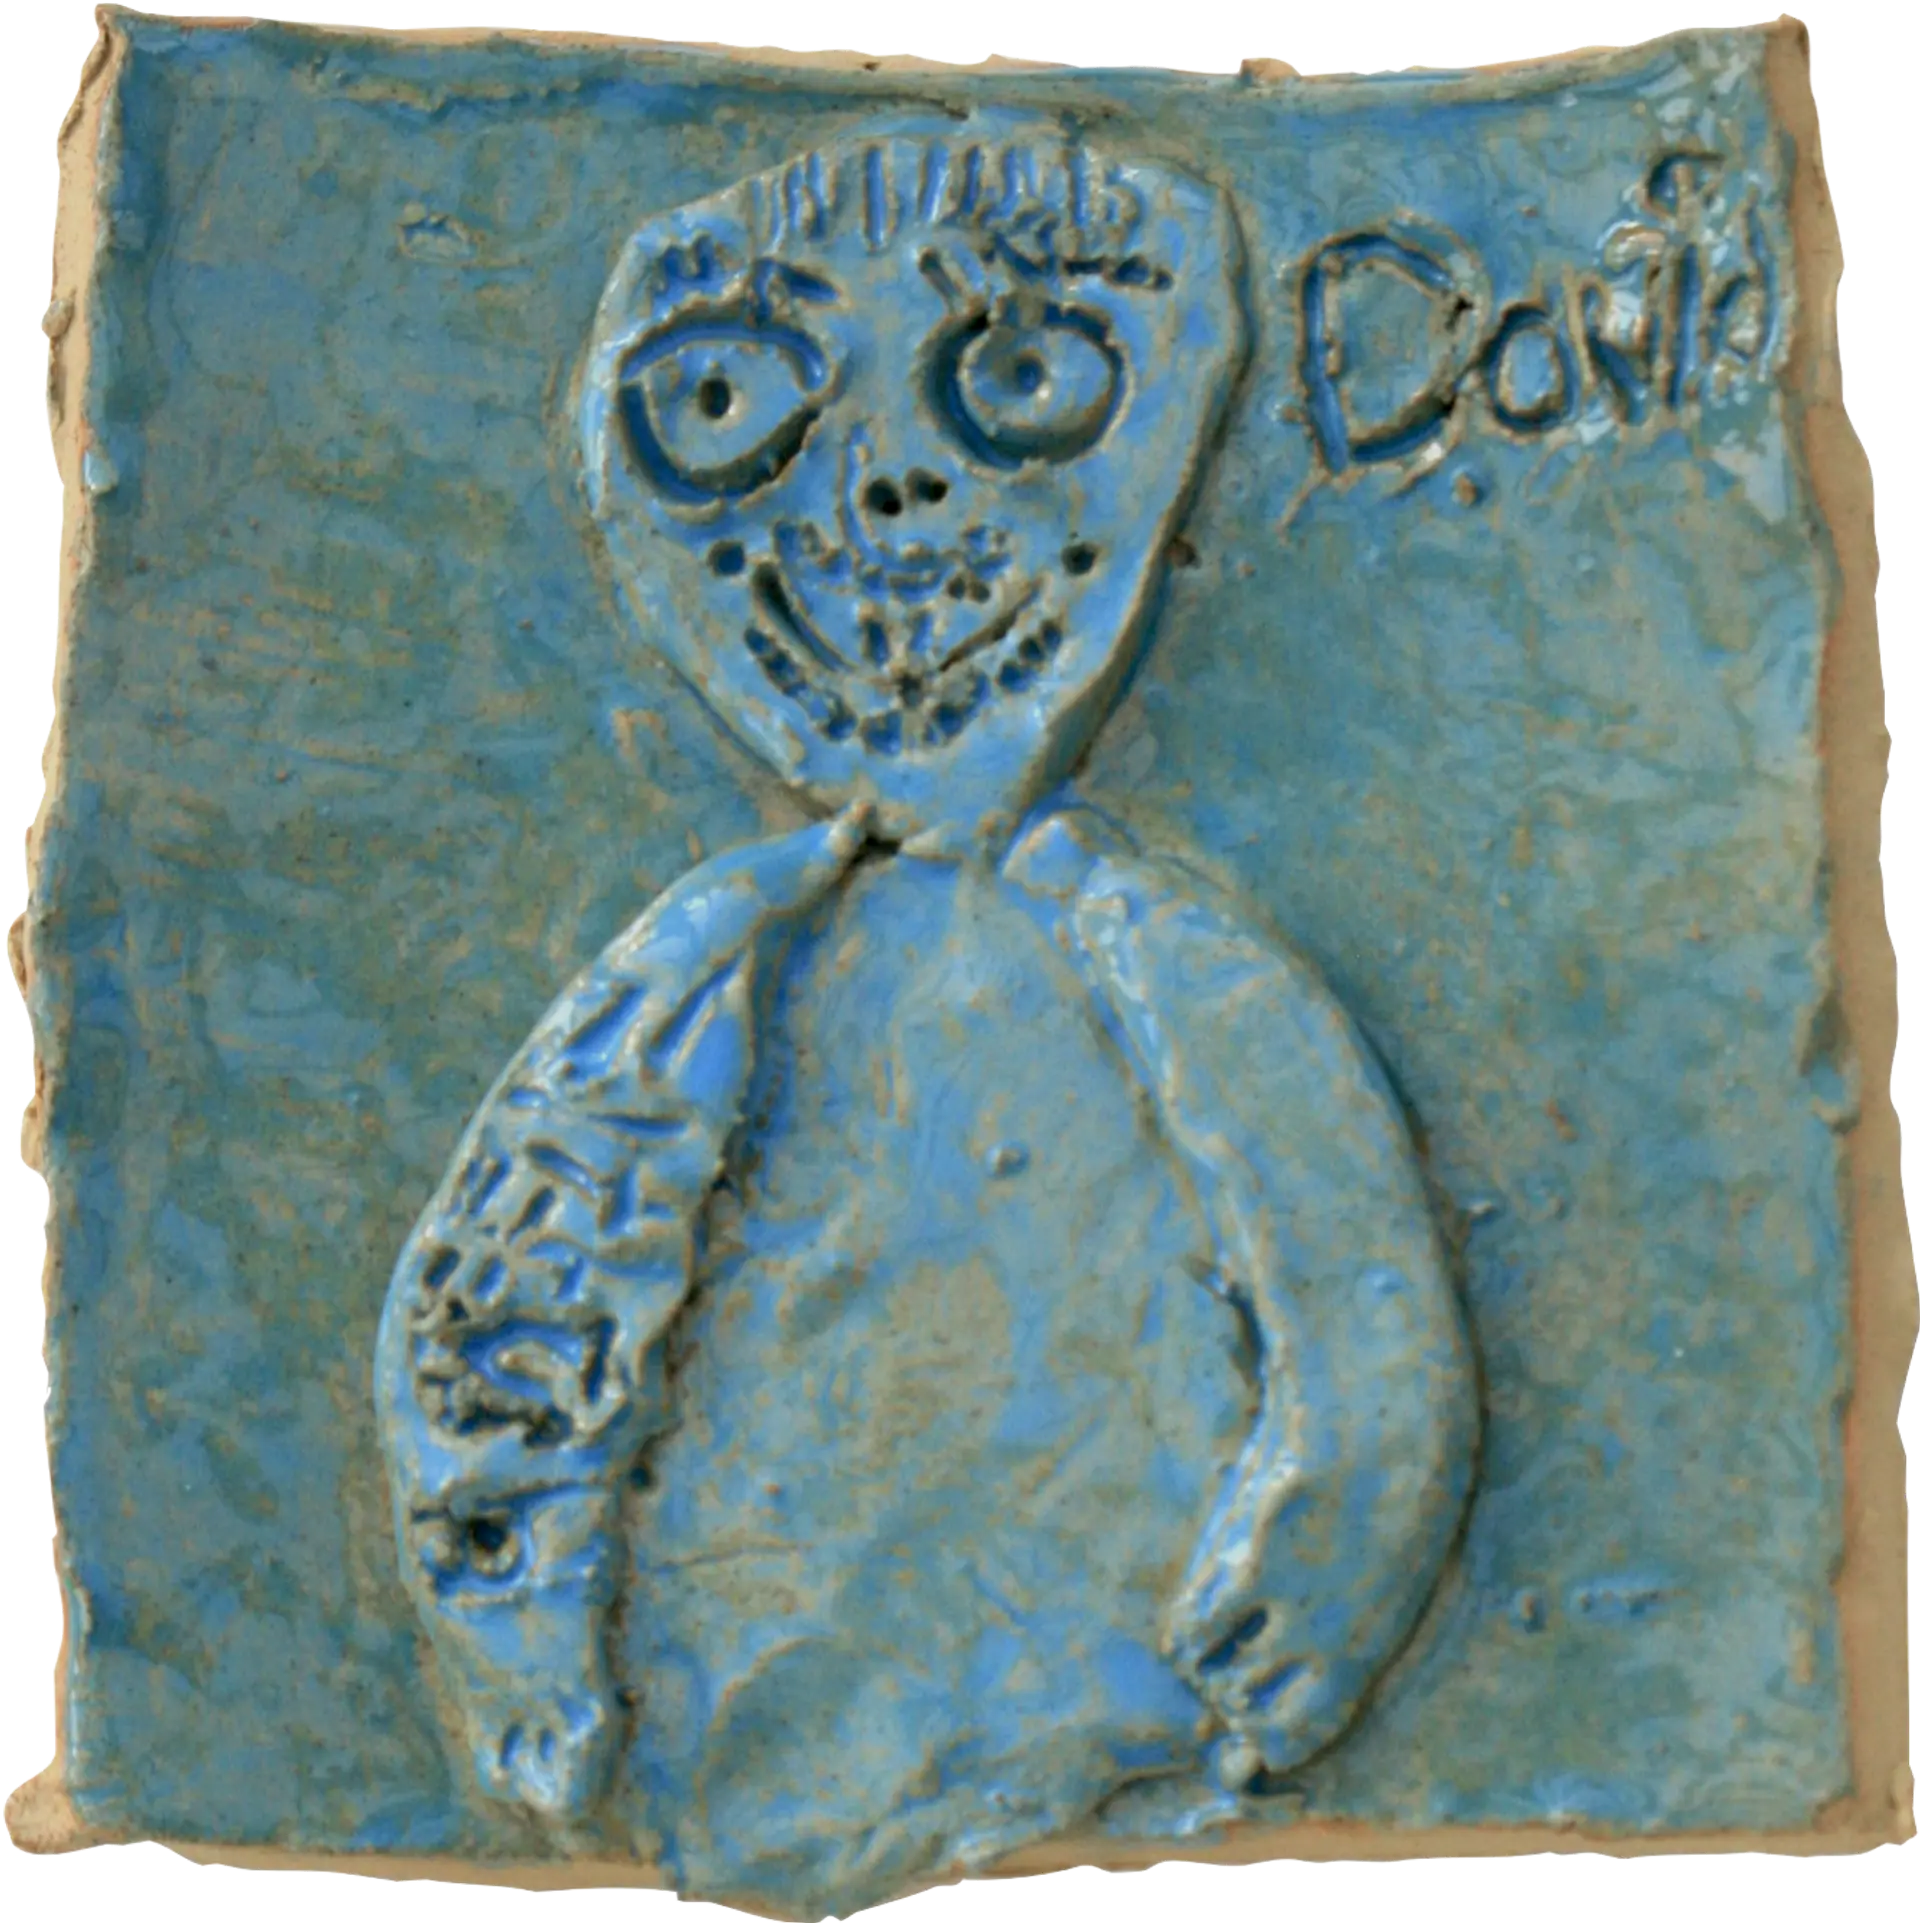 A blue glazed ceramic tile of David, Jessica’s sister’s boyfriend. He is smiling and has a detailed tattoo on his right arm. 